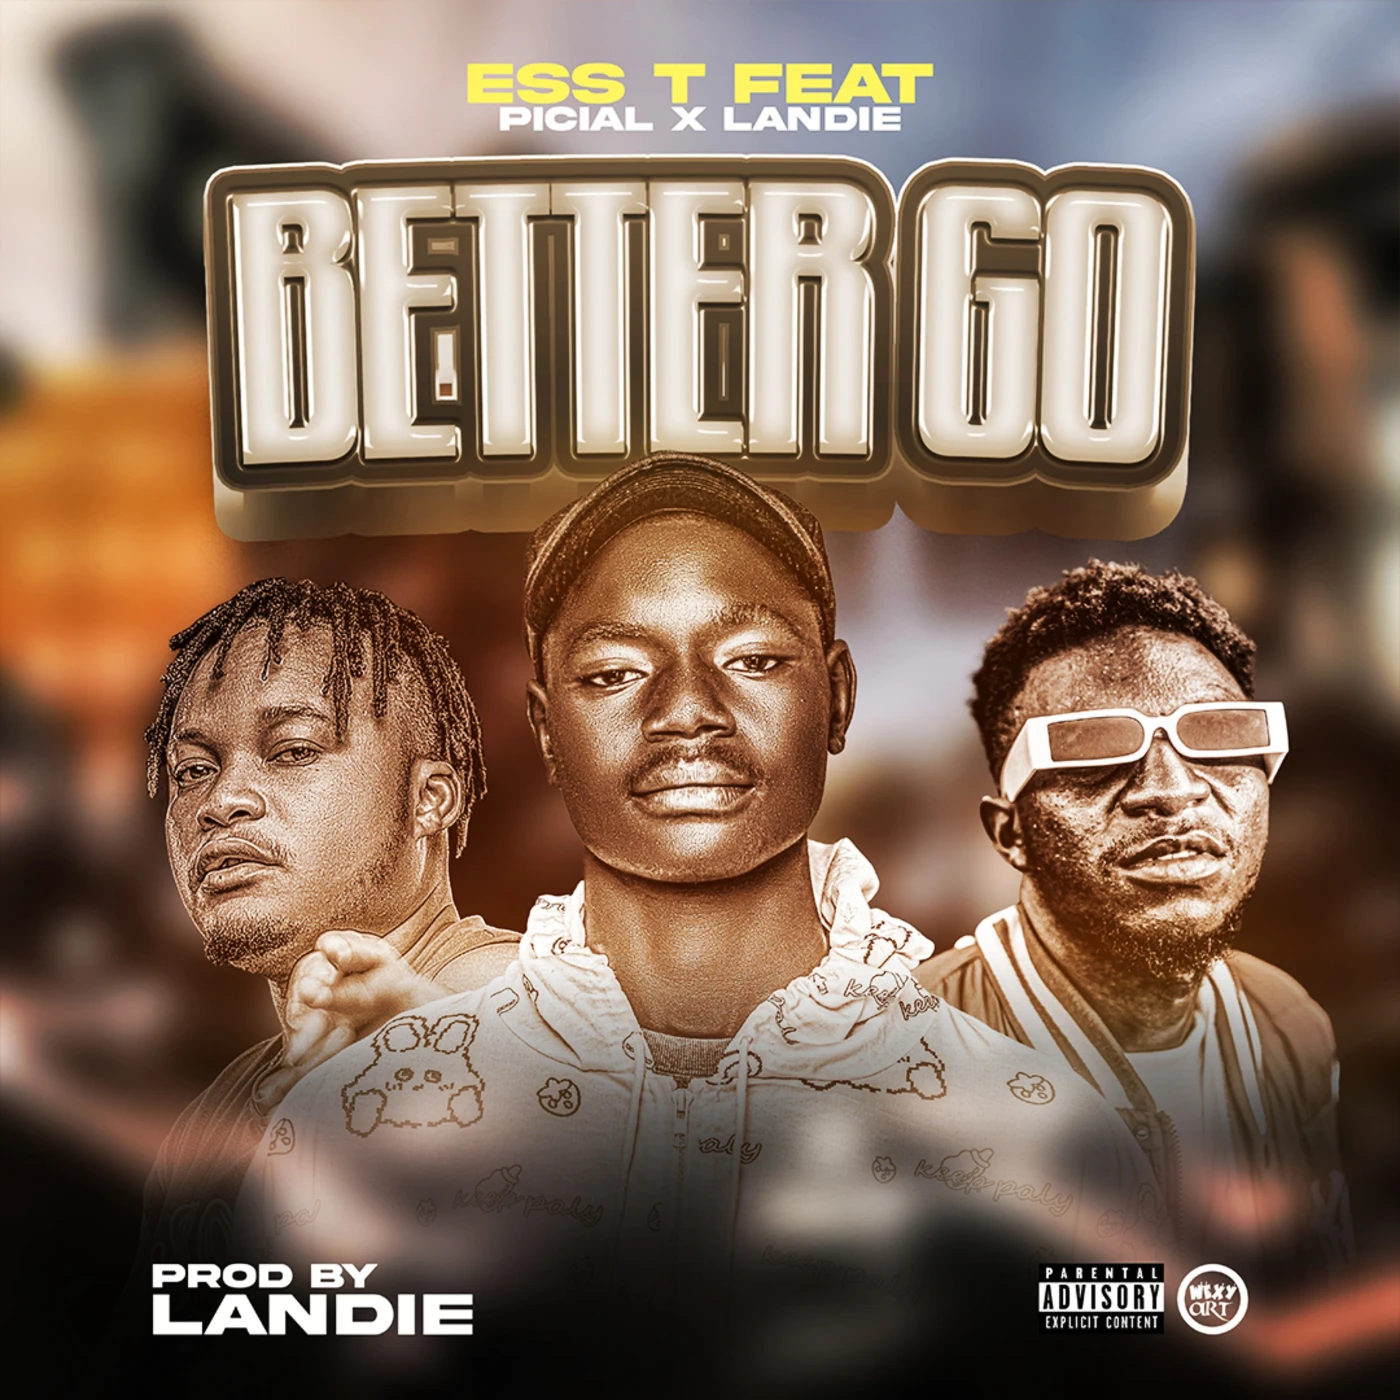 better-go-feat-picial-landie-ess-t-just malawi